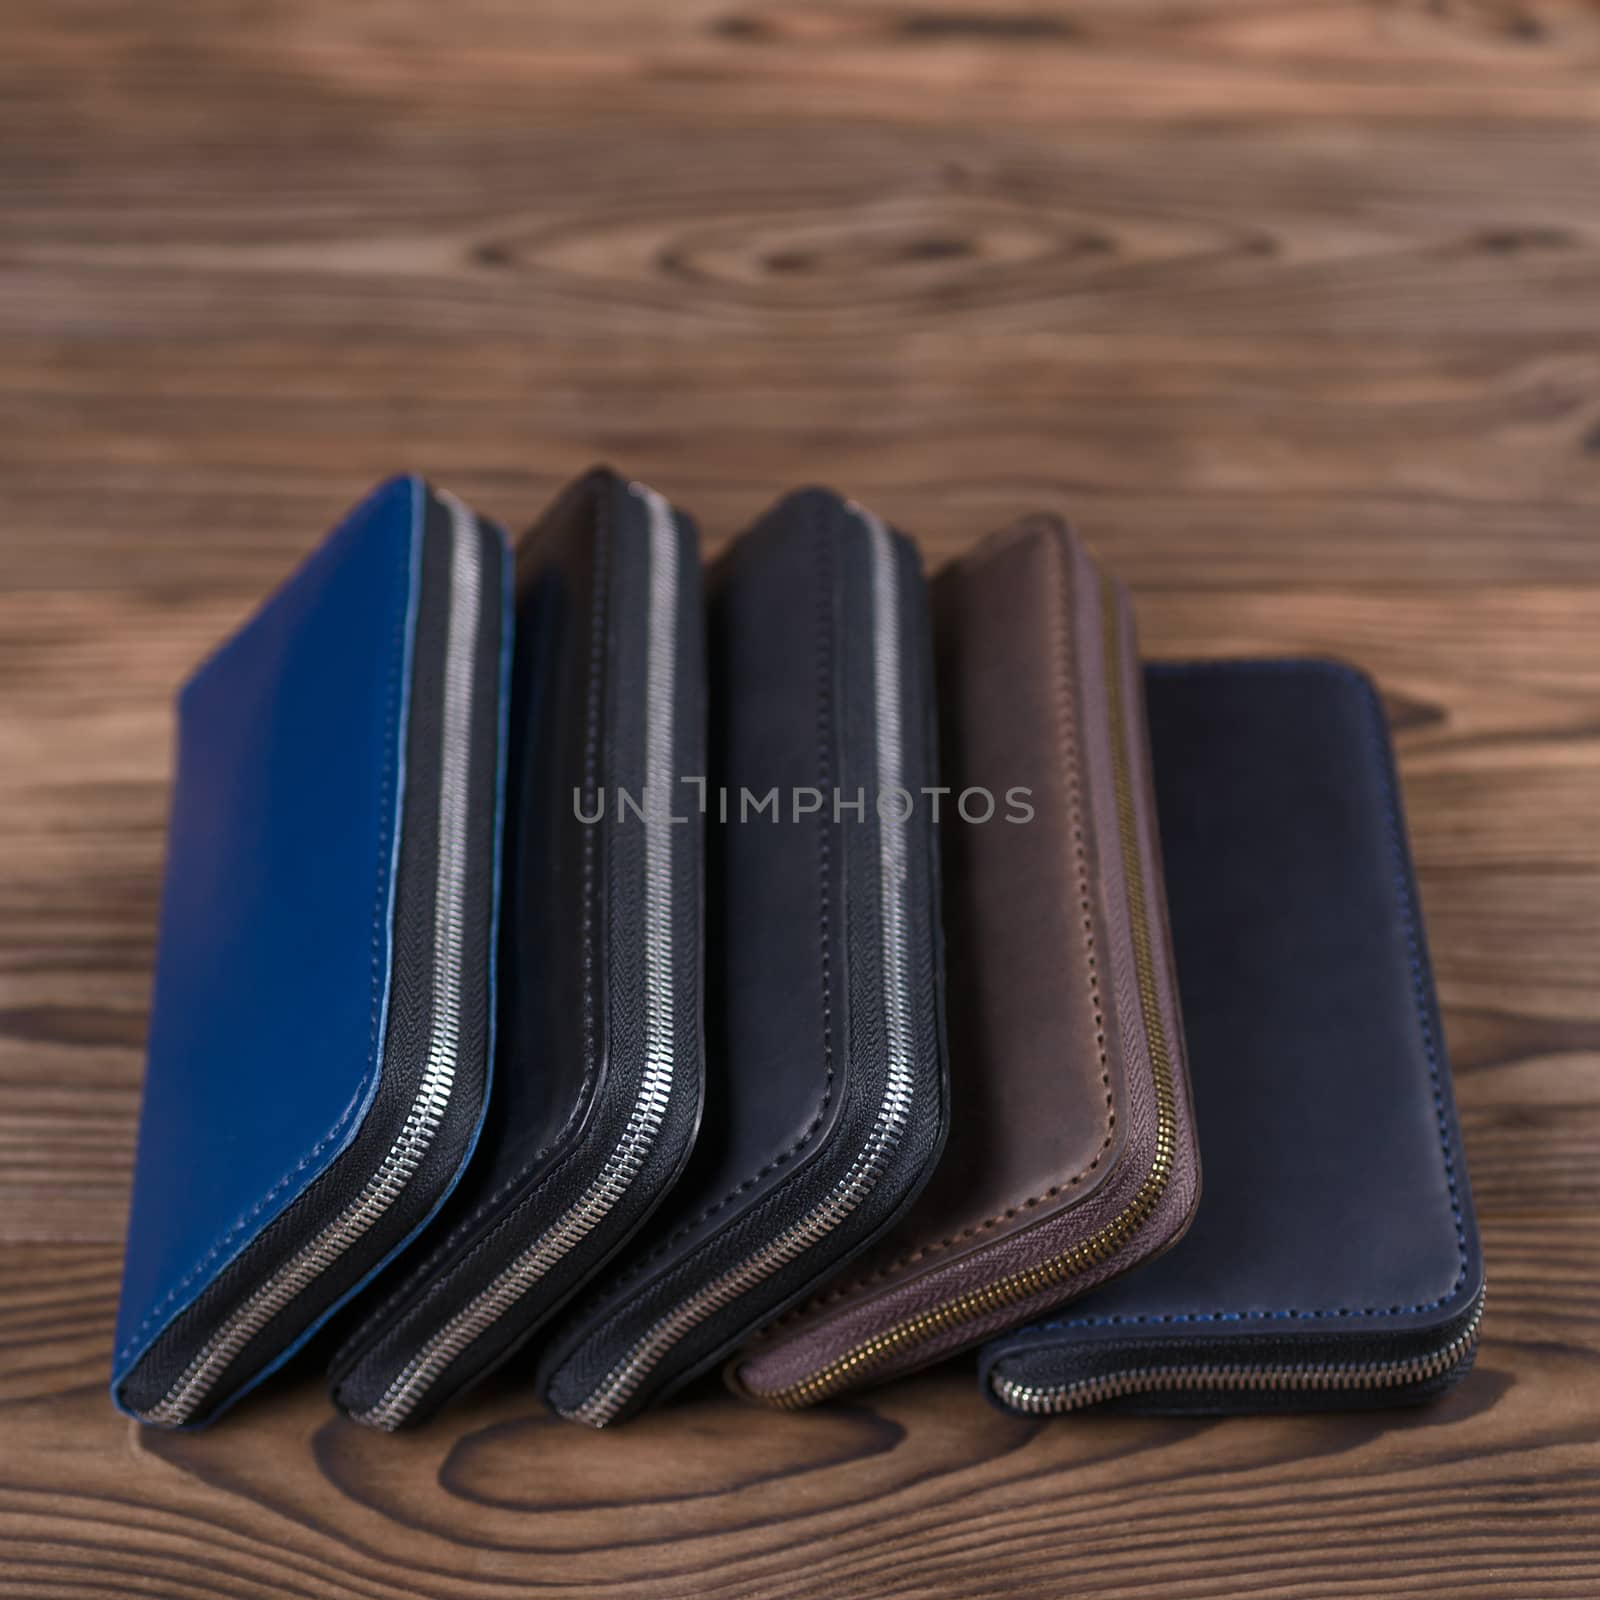 Five handmade leather porte-monnaie lies on wooden textured background.  Side view. Stock photo of luxury accessories with blurred background.. by alexsdriver